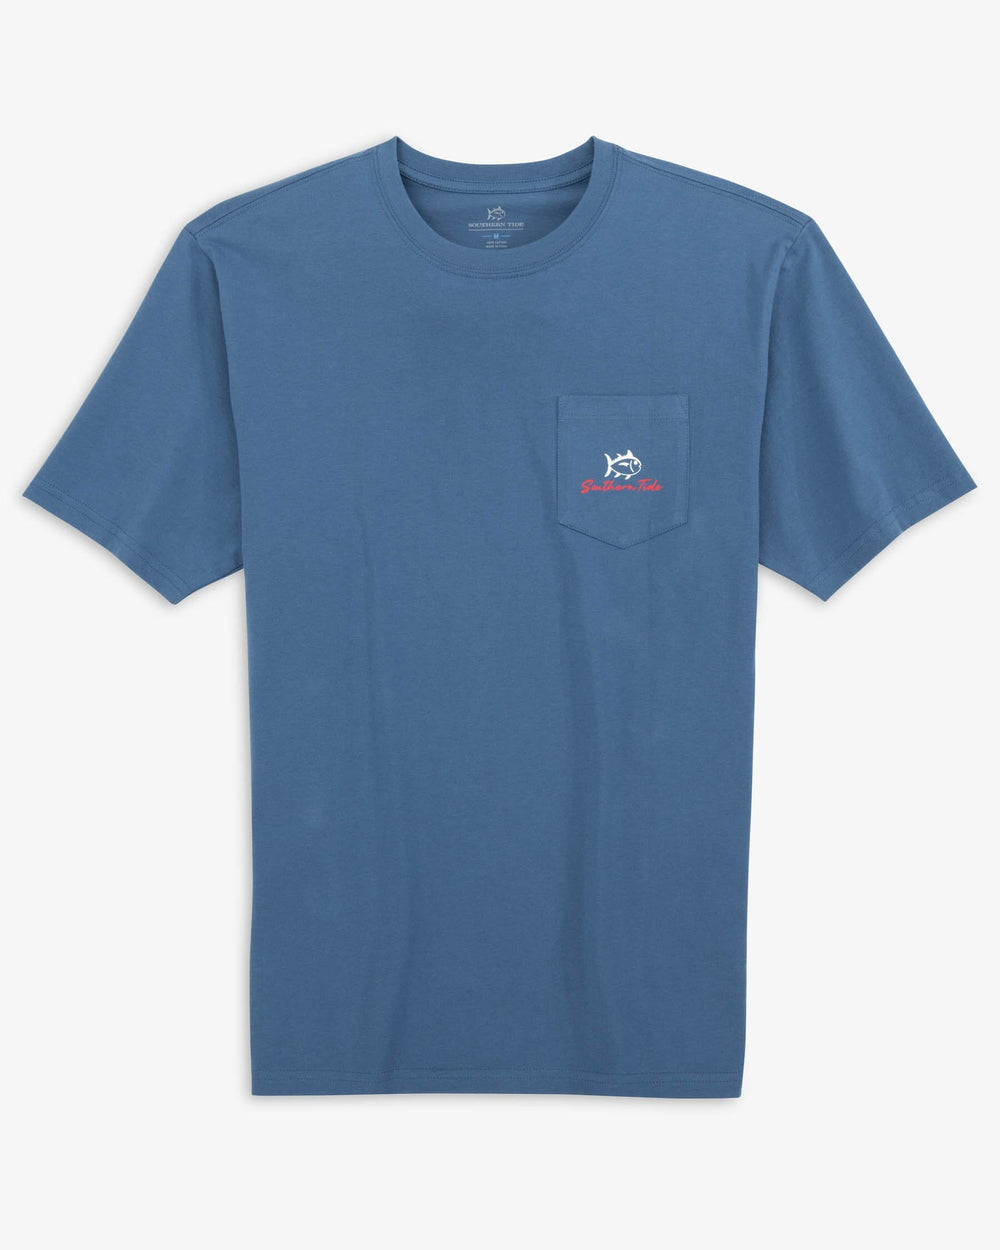 The front view of the Southern Tide Red White and Lure T-shirt by Southern Tide - Aged Denim